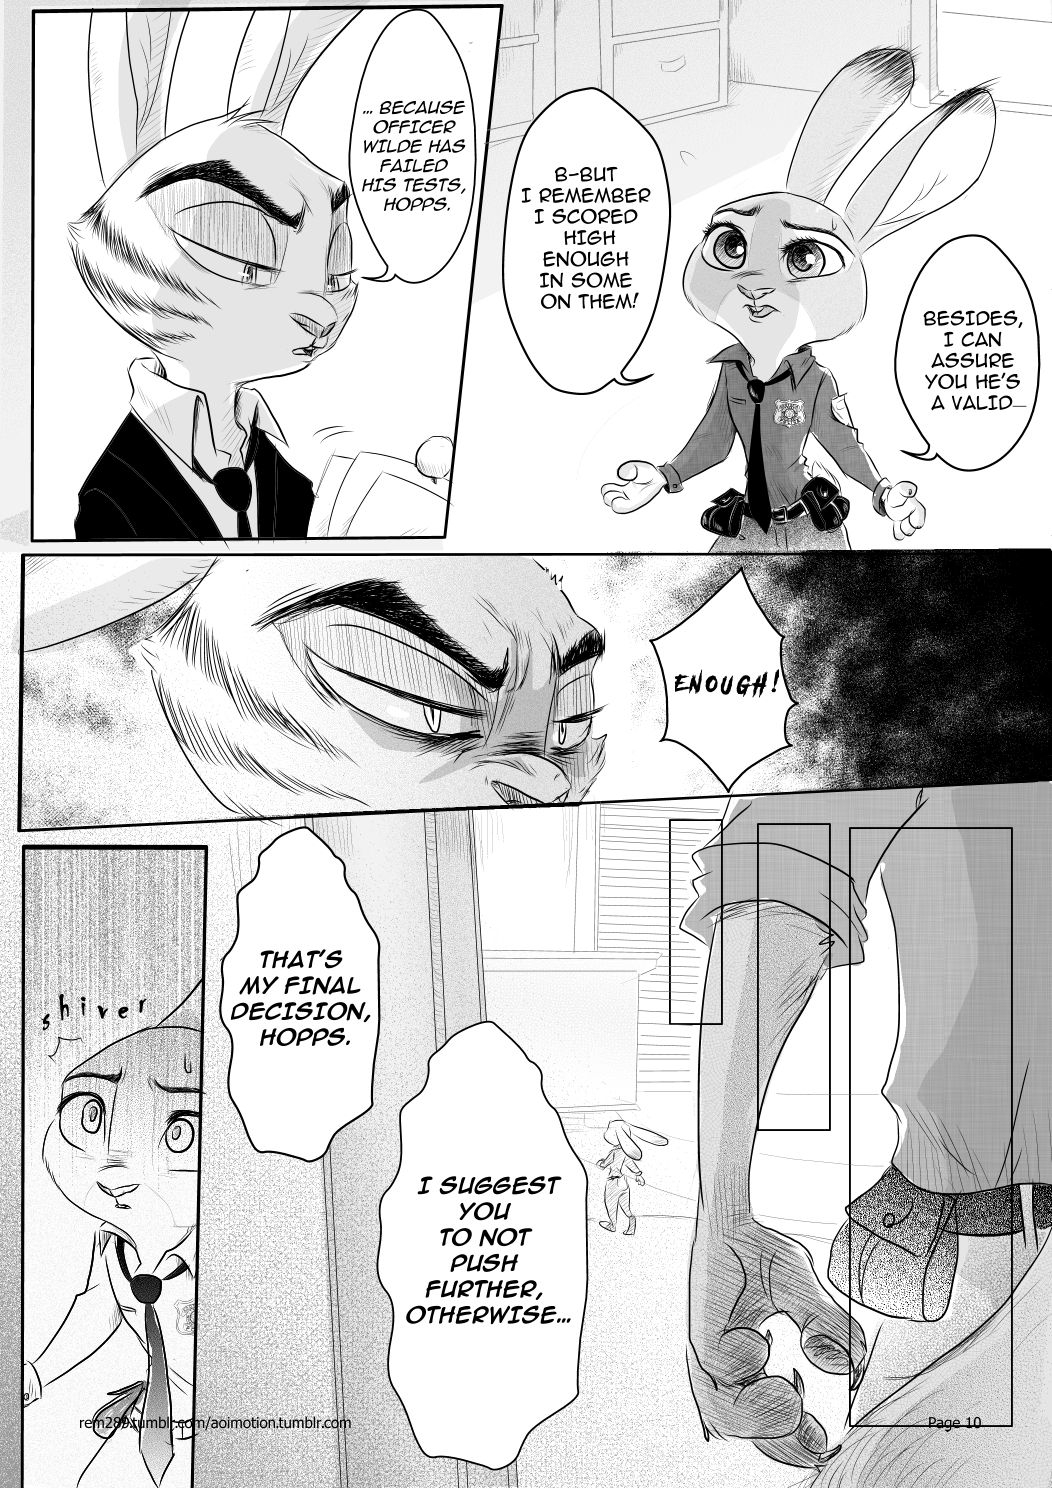 [Rem289] Black♡Jack V - The Good and The Bad (Zootopia) (English) 9